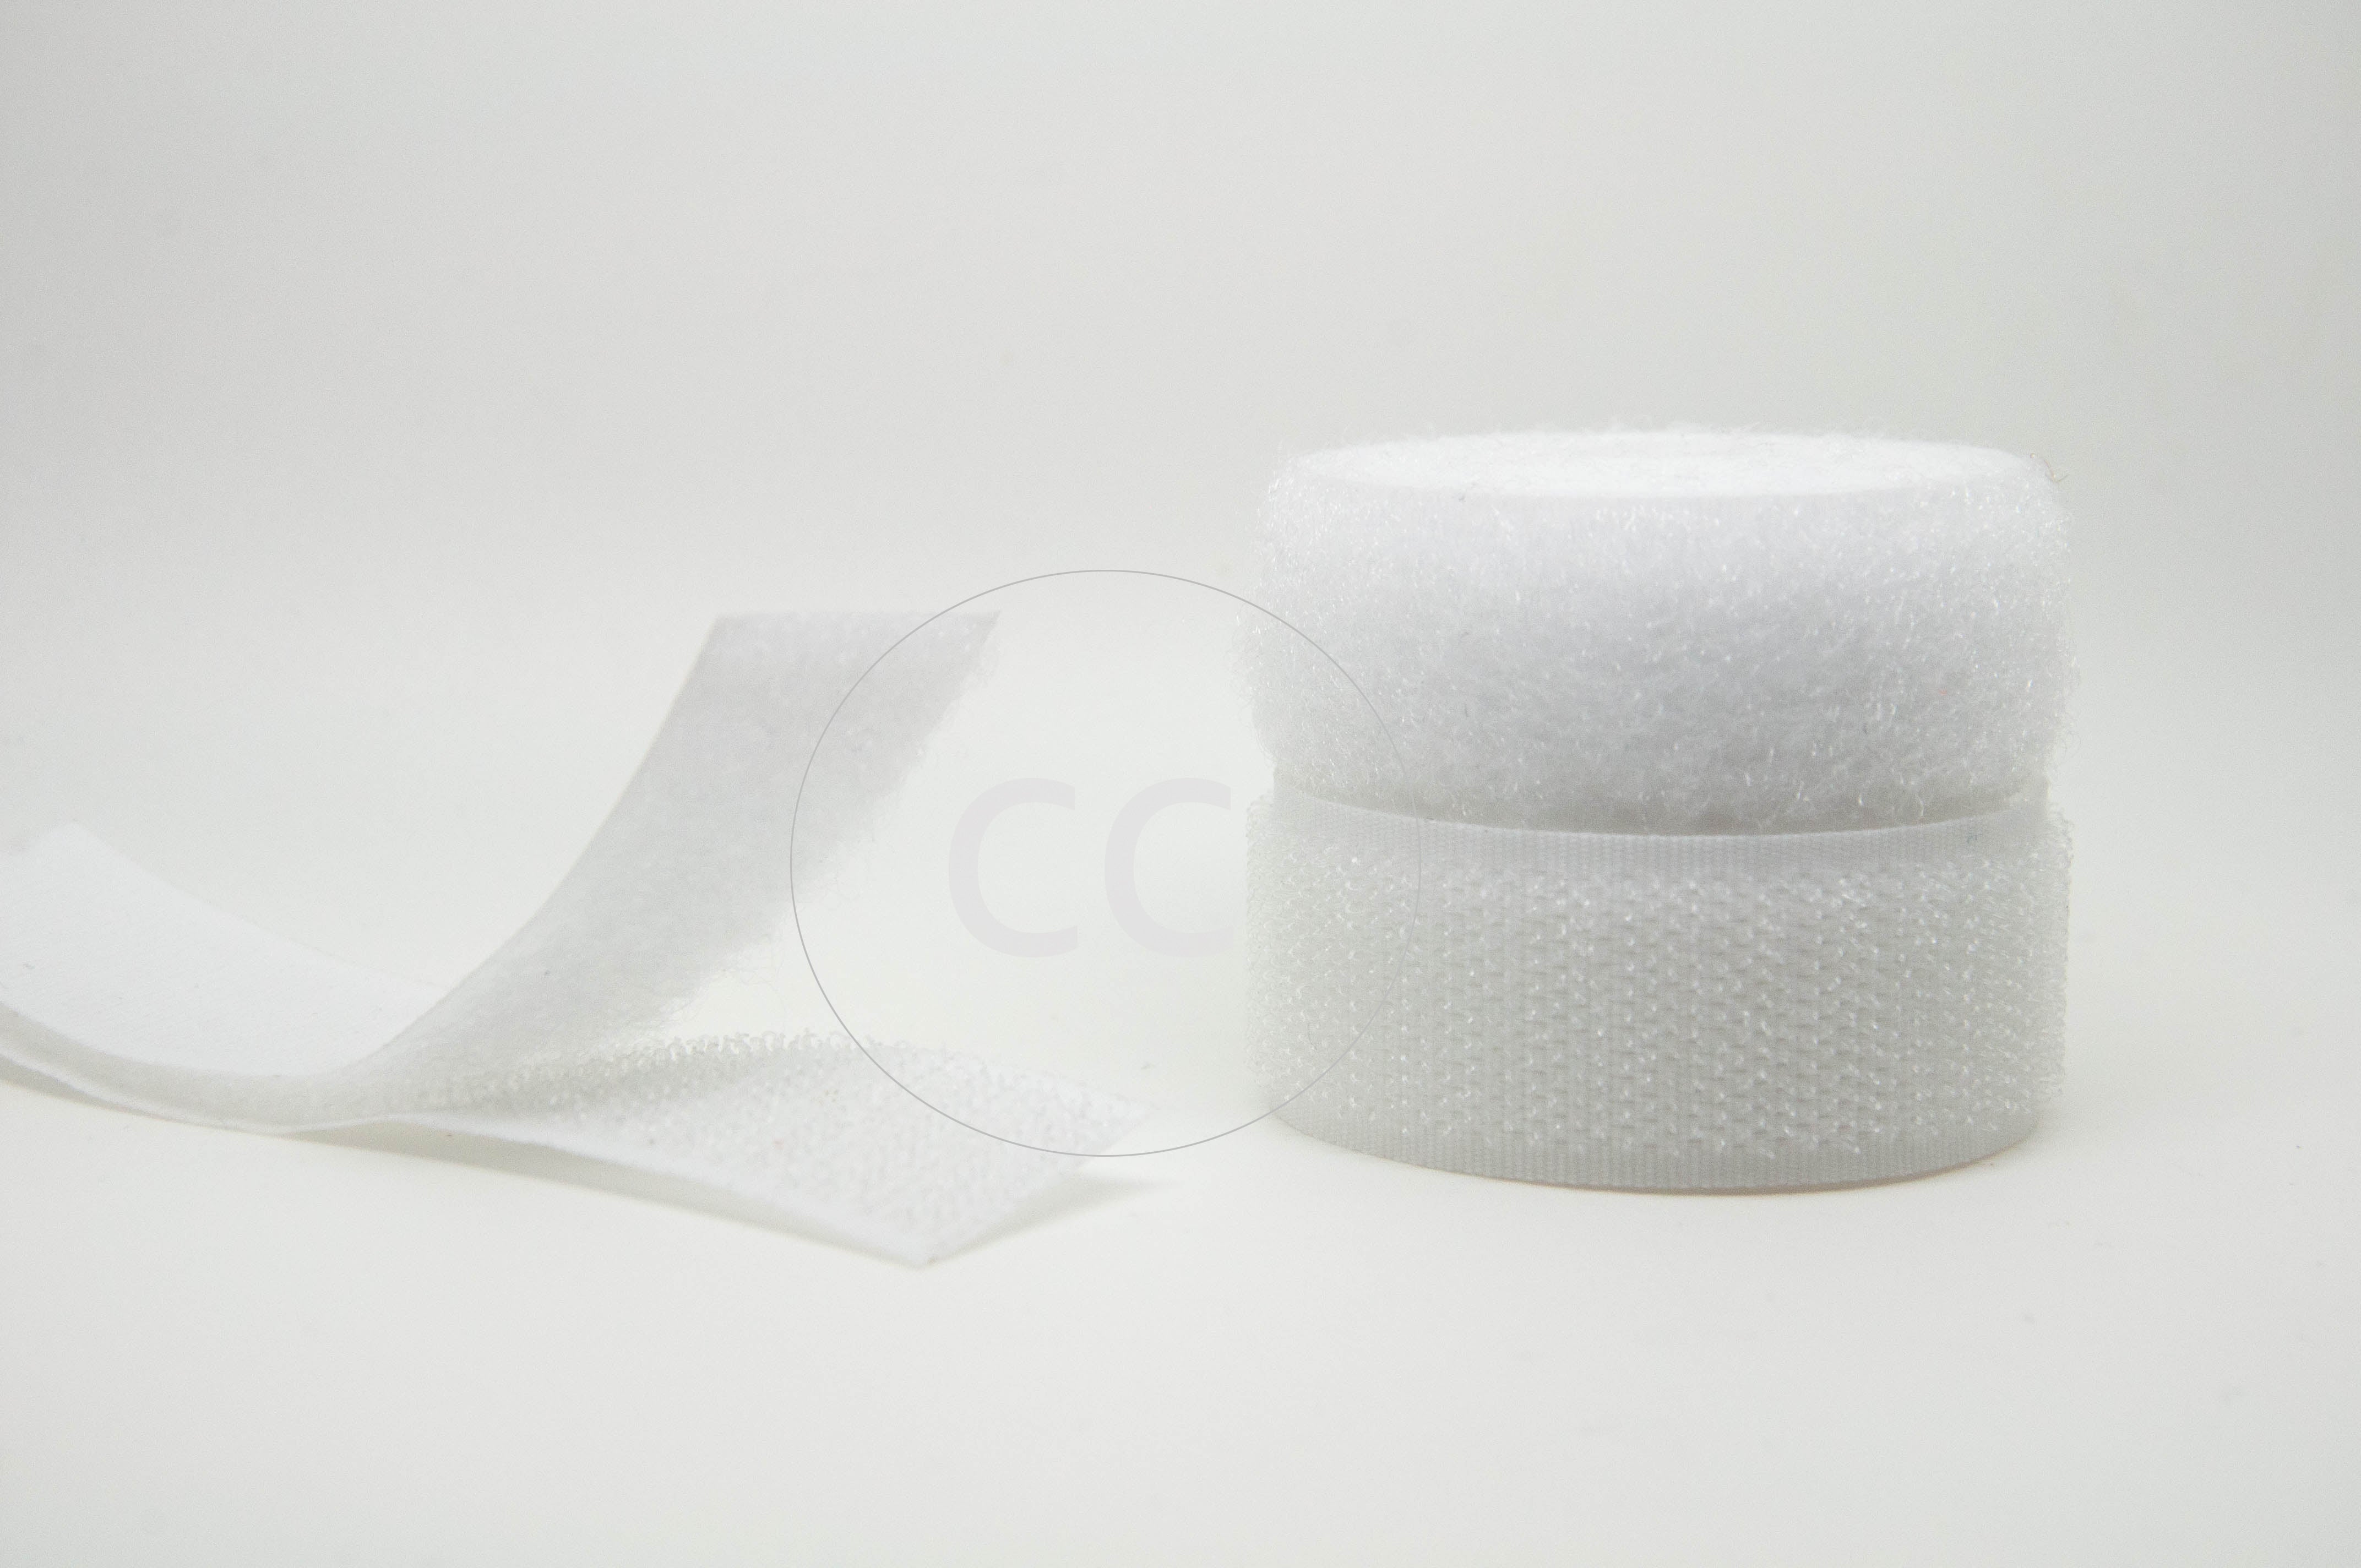 White Sew-on Hook & Loop tape Alfatex® Brand supplied by the Velcro Companies